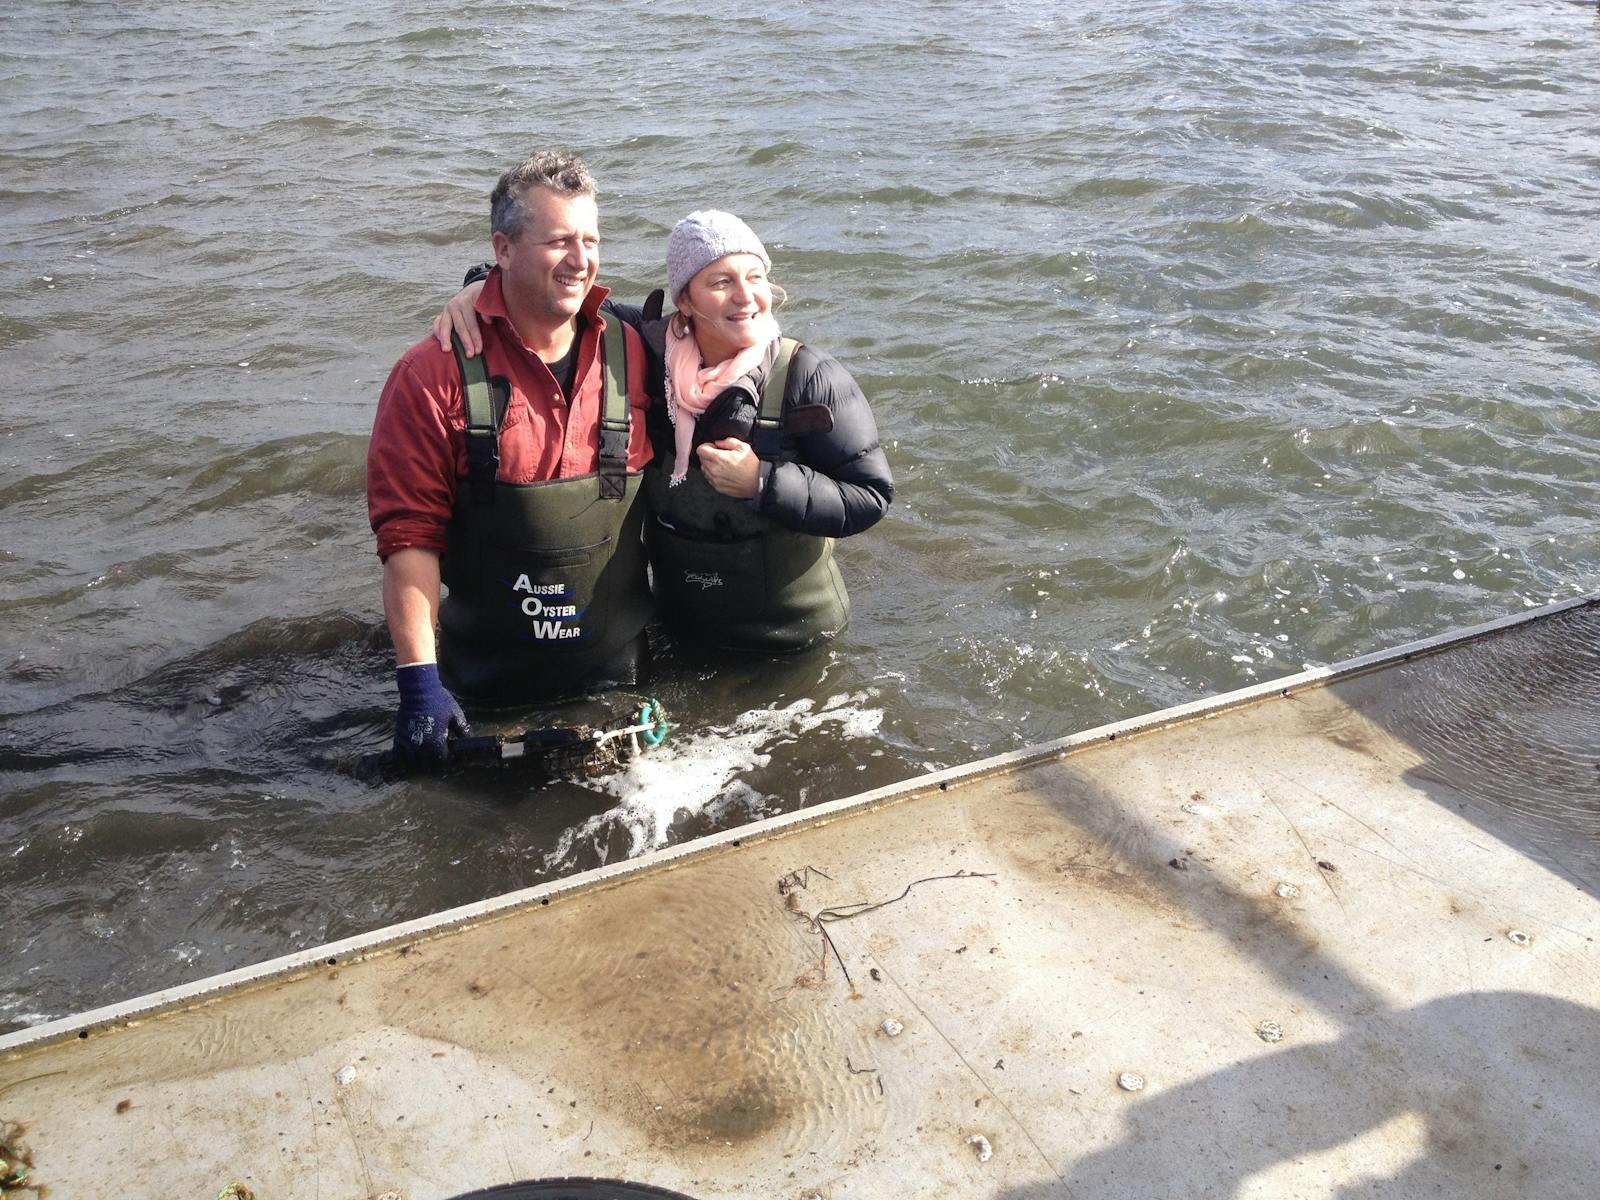 Julia and Giles Fisher farming Oysters at Freycinet marine farm